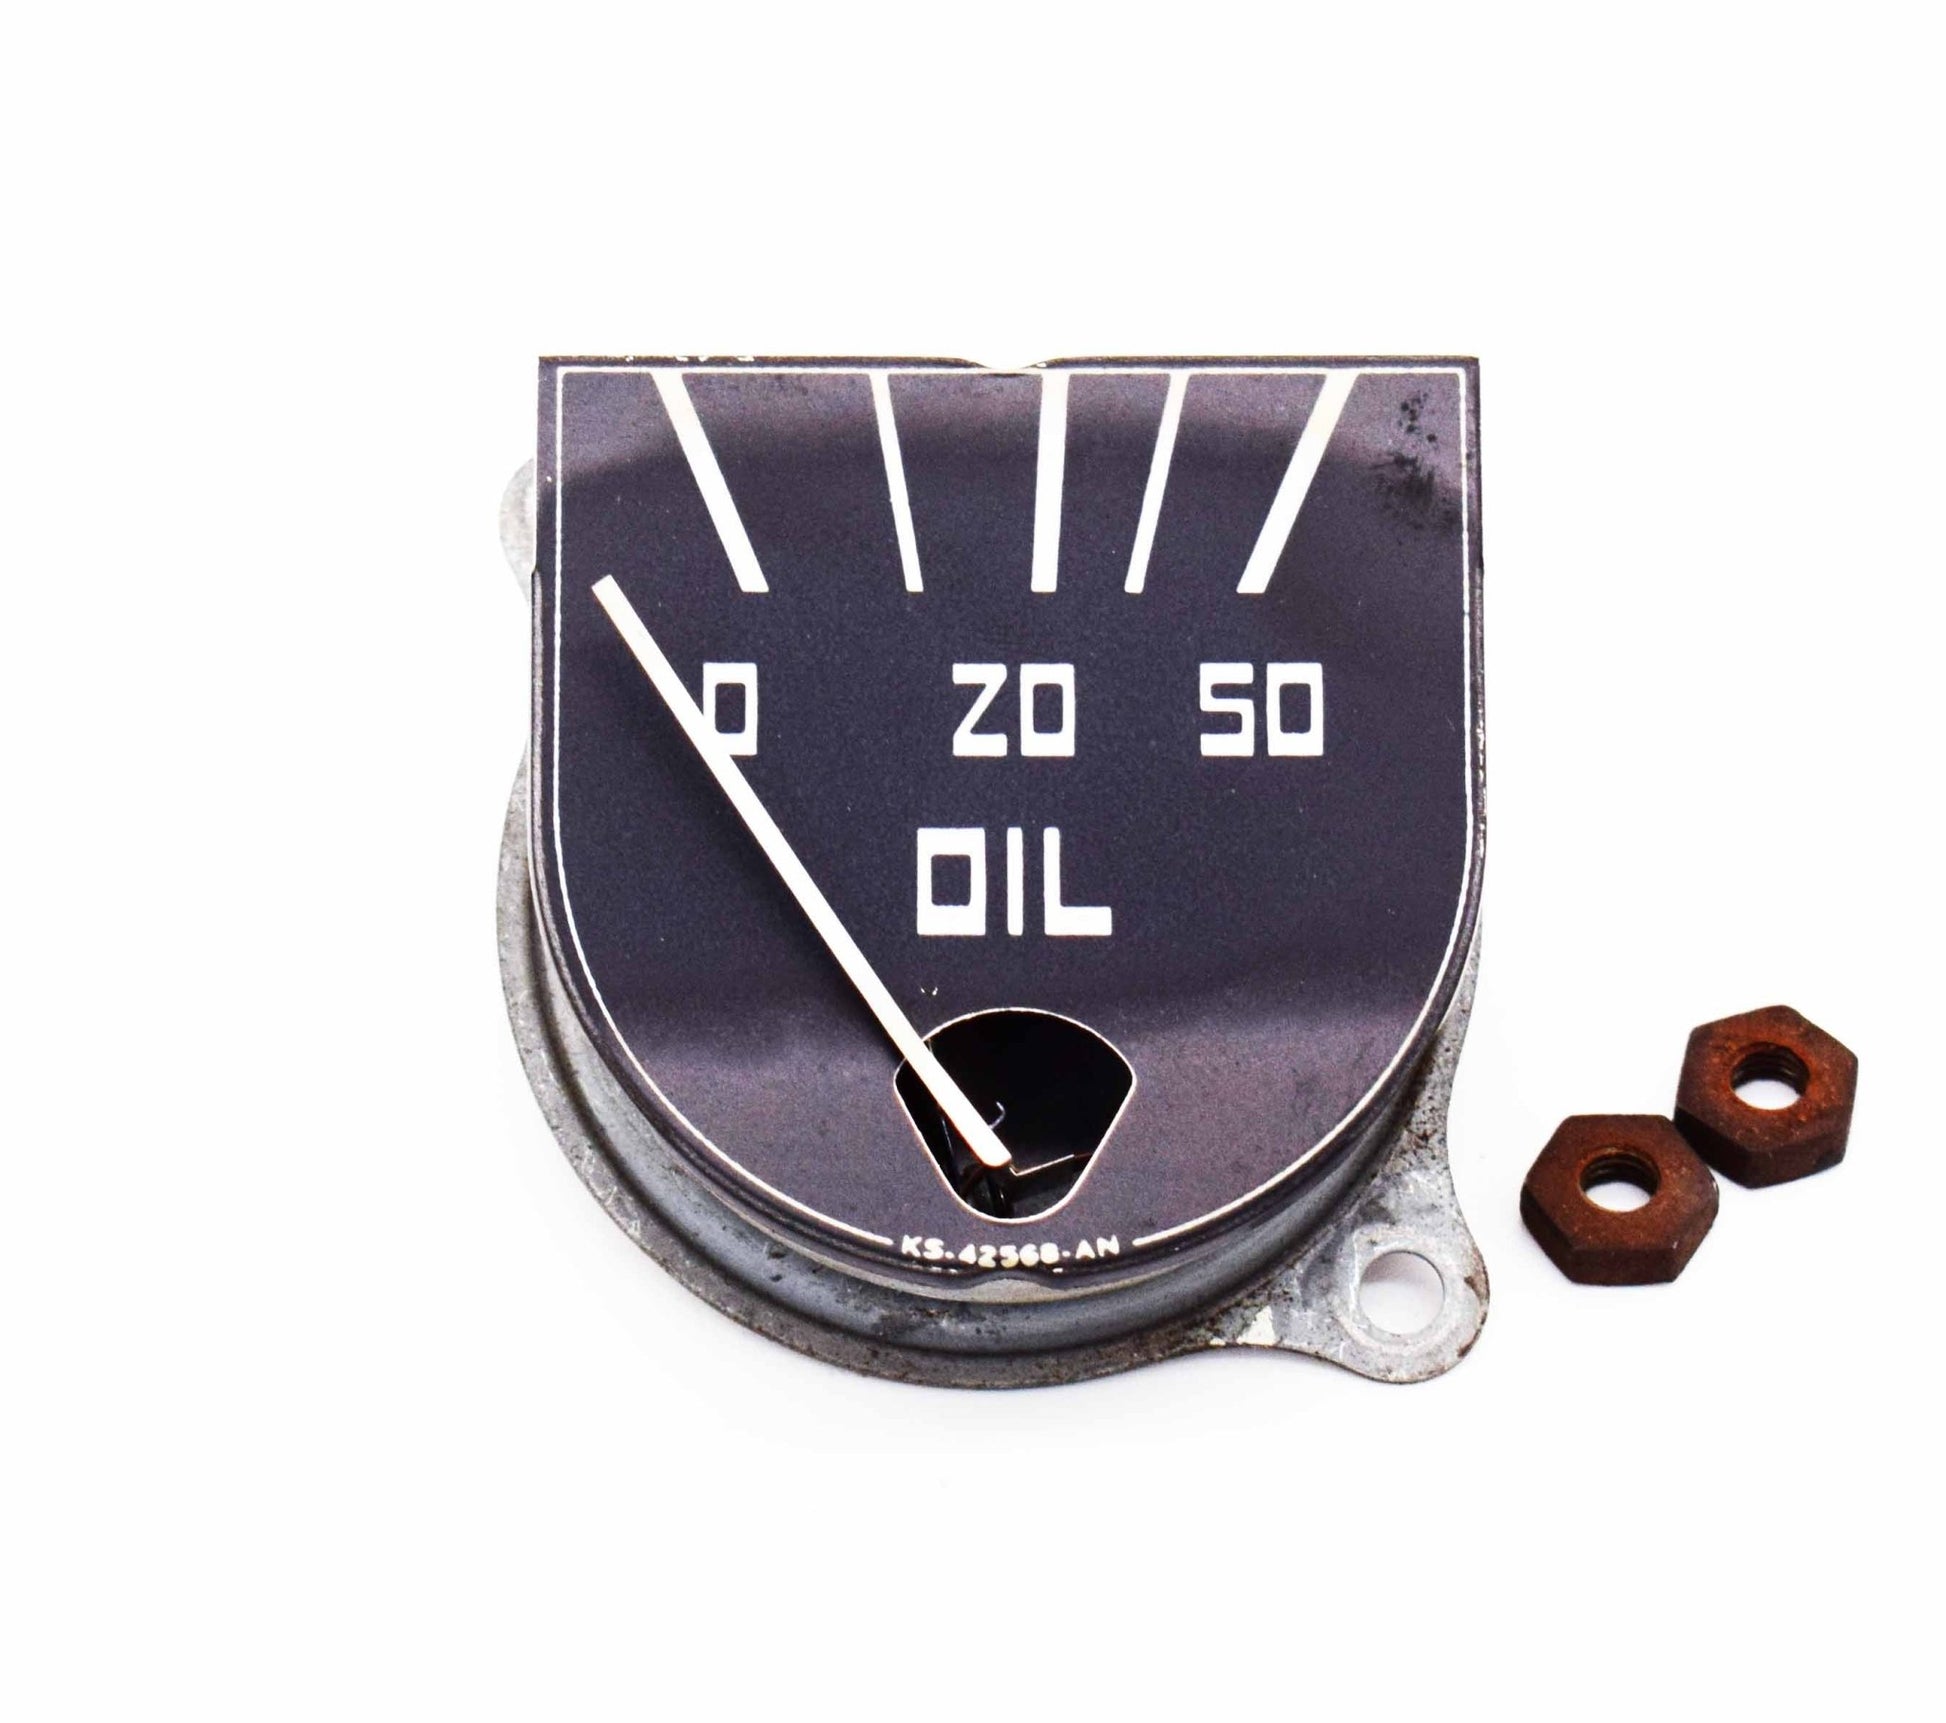 Oil Pressure Gauge, Black Face, Used, 1948-1949, Jeepster - The JeepsterMan